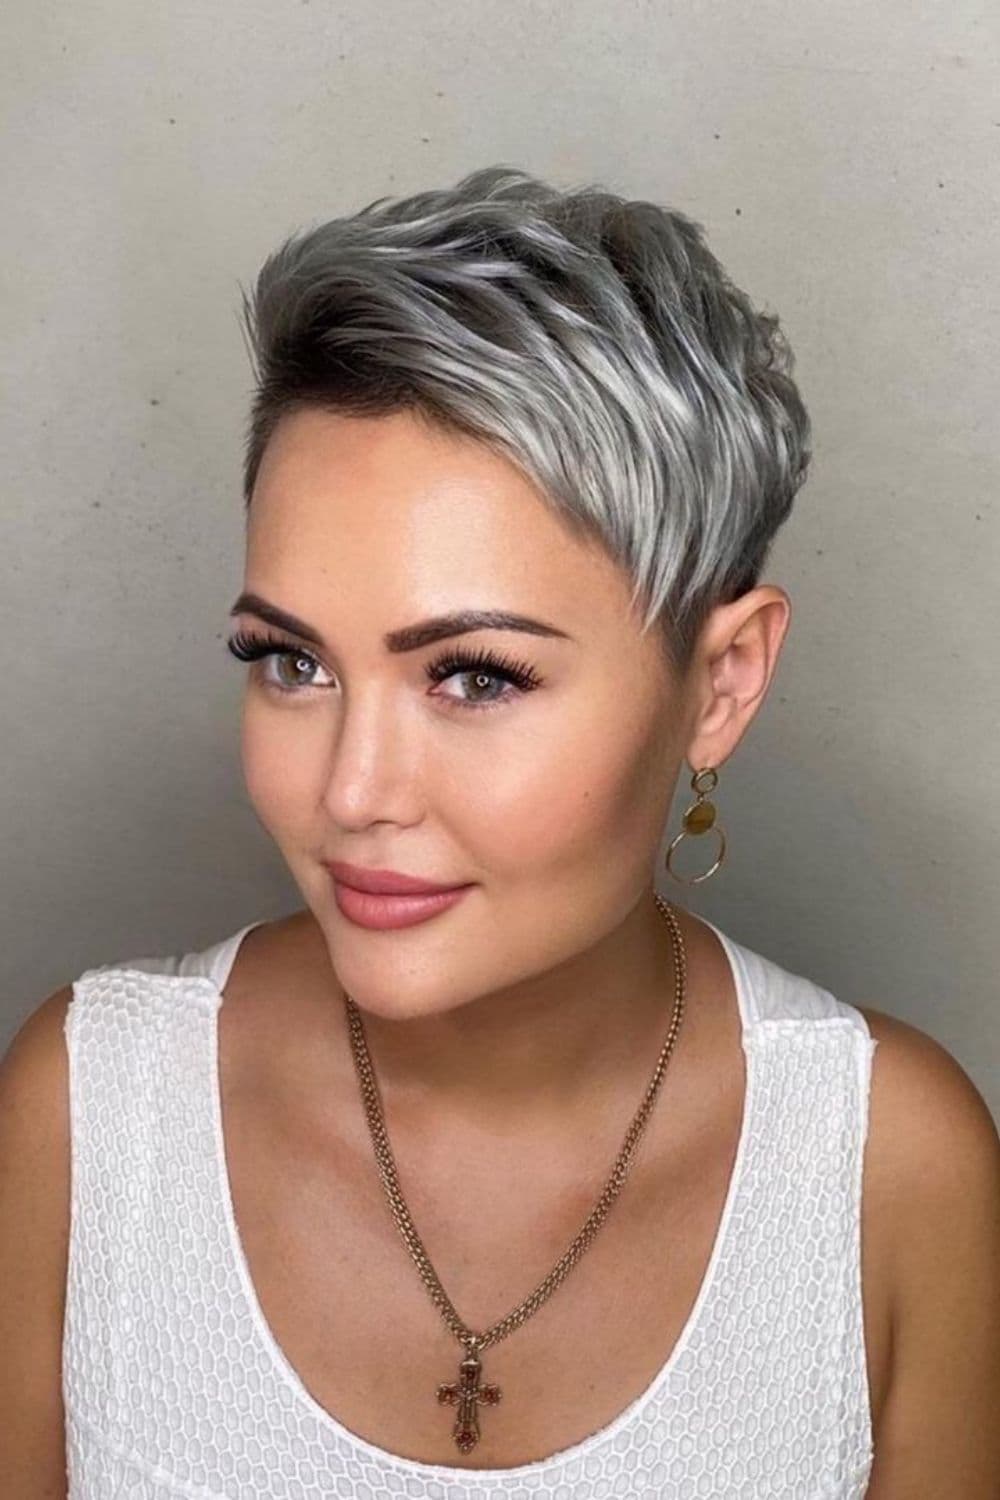 A woman with black and gray hair in a classic pixie cut.